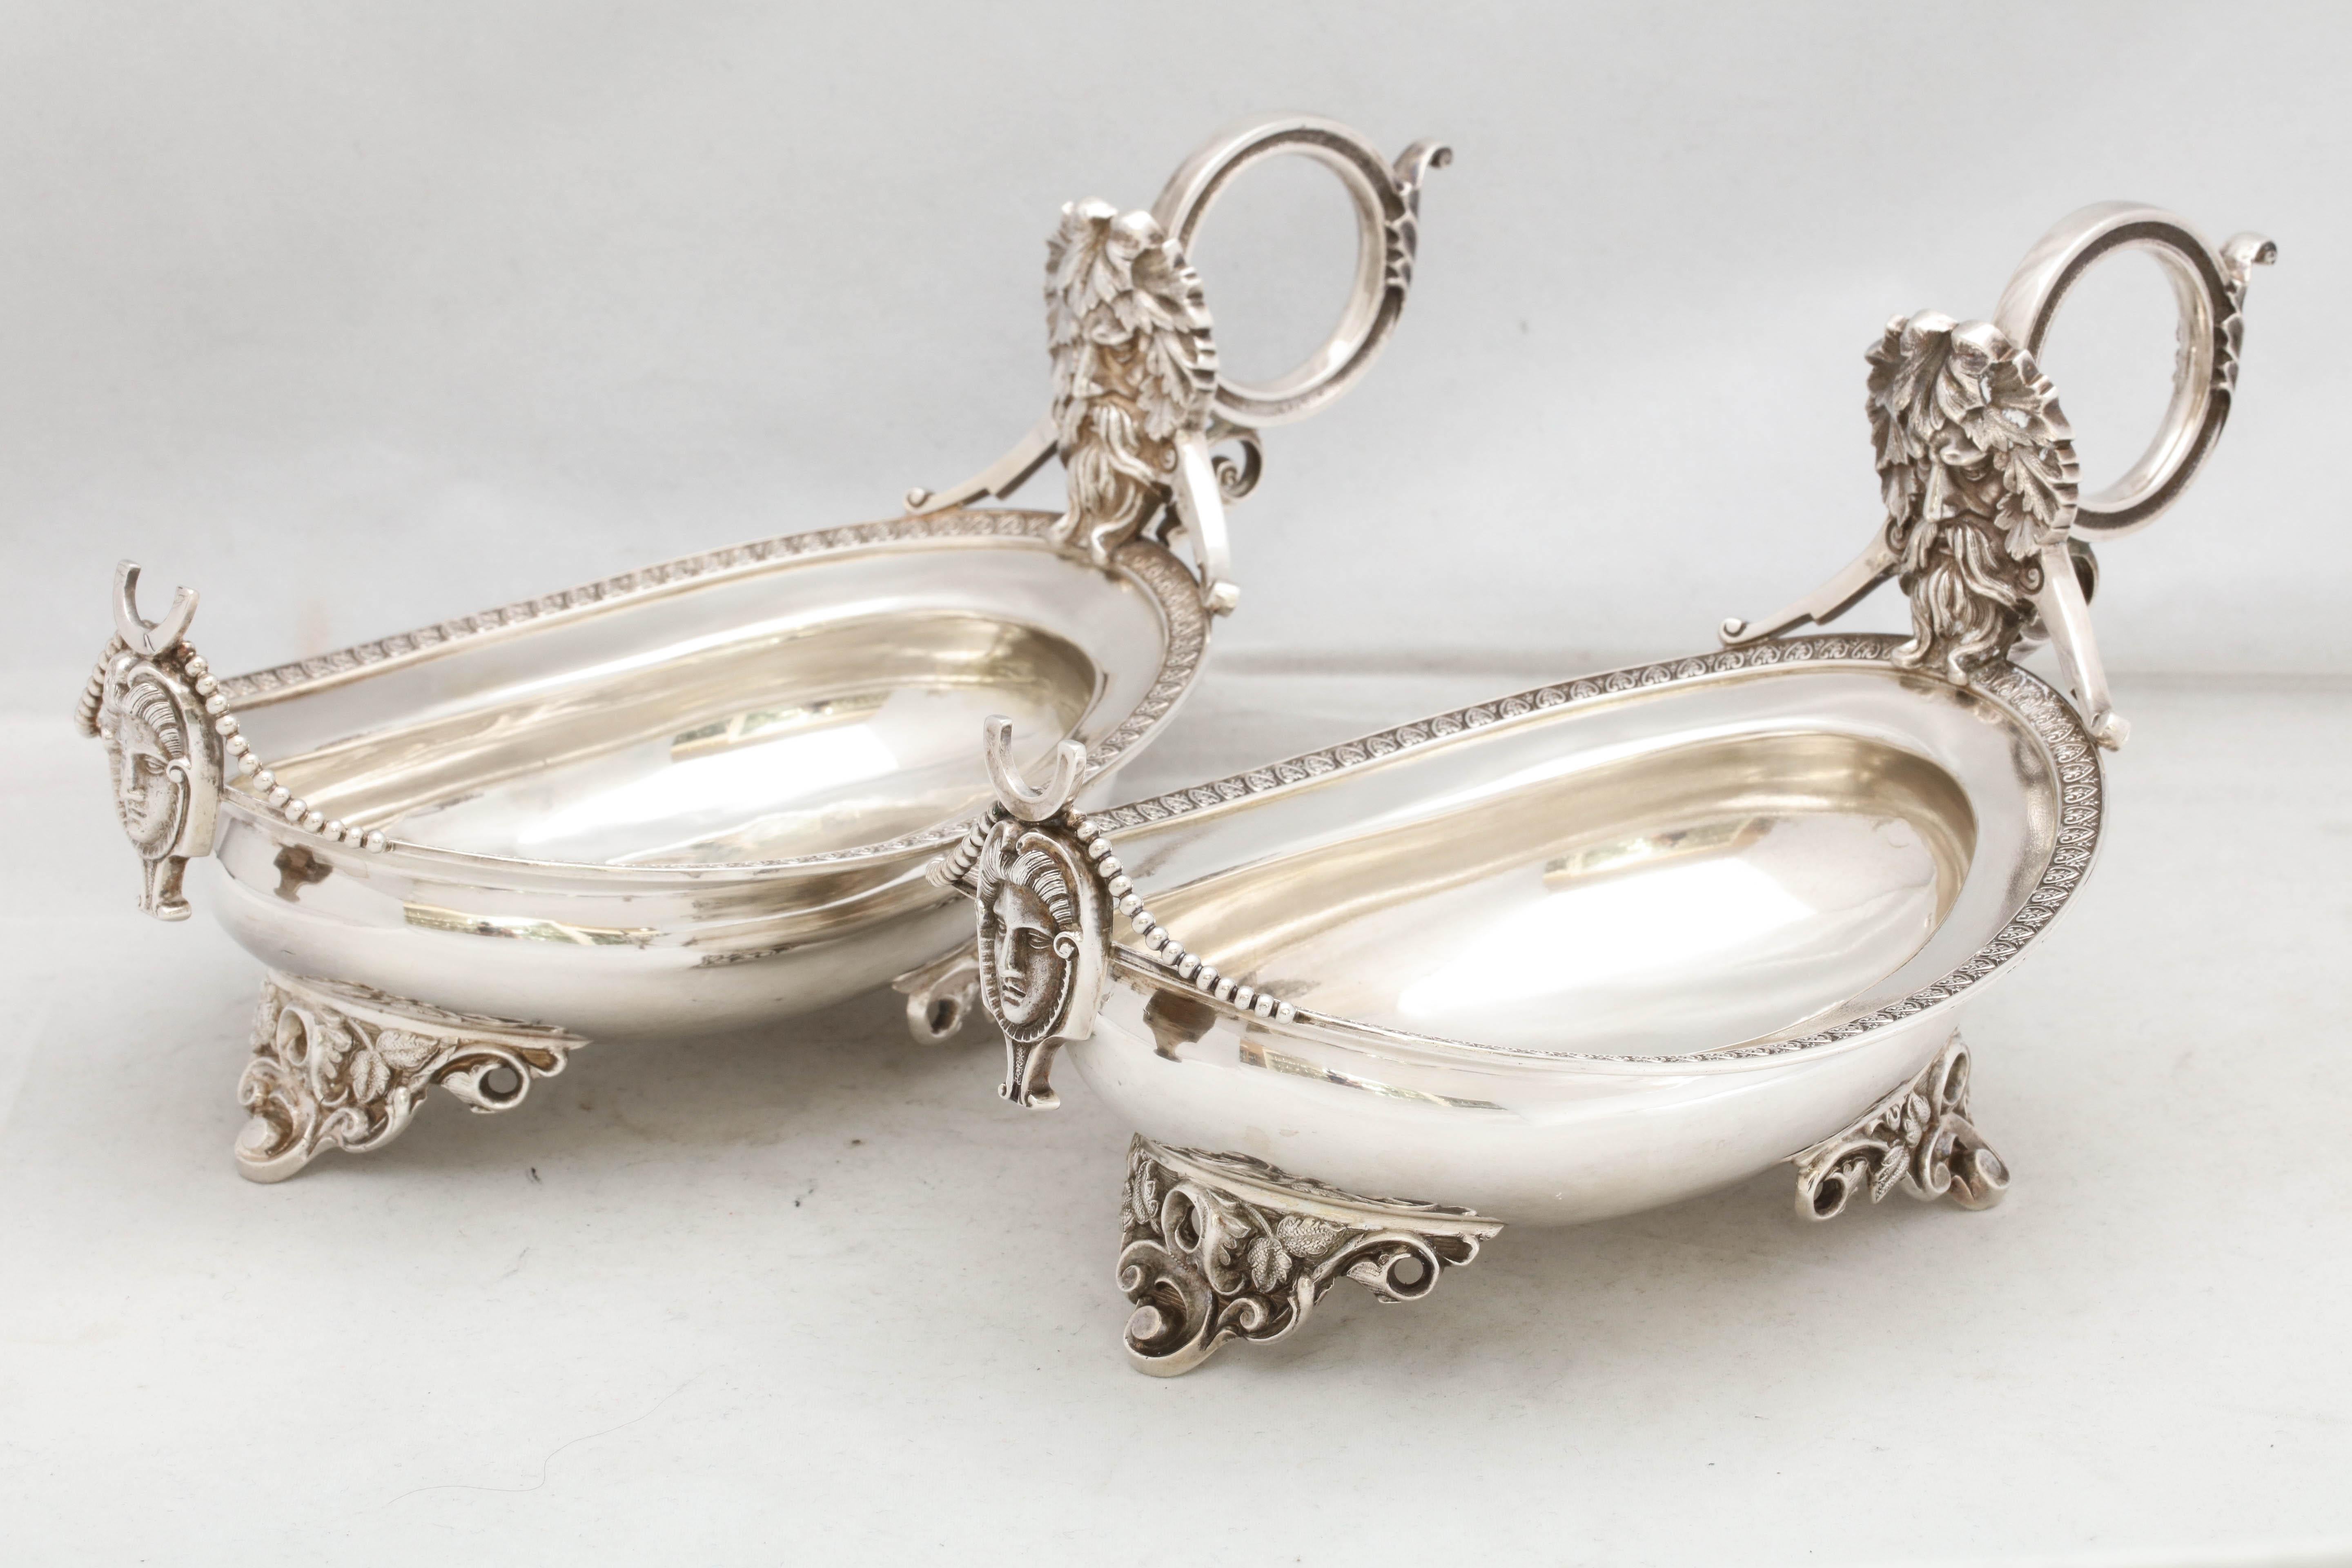 Pair of American, neoclassical, coin silver, footed sauce/gravy boats, New York, Wood and Hughes - makers, circa 1870. The handle of each sauce/gravy boat terminates in a bearded, man's head. A woman's face is at the outer, opposite end of each